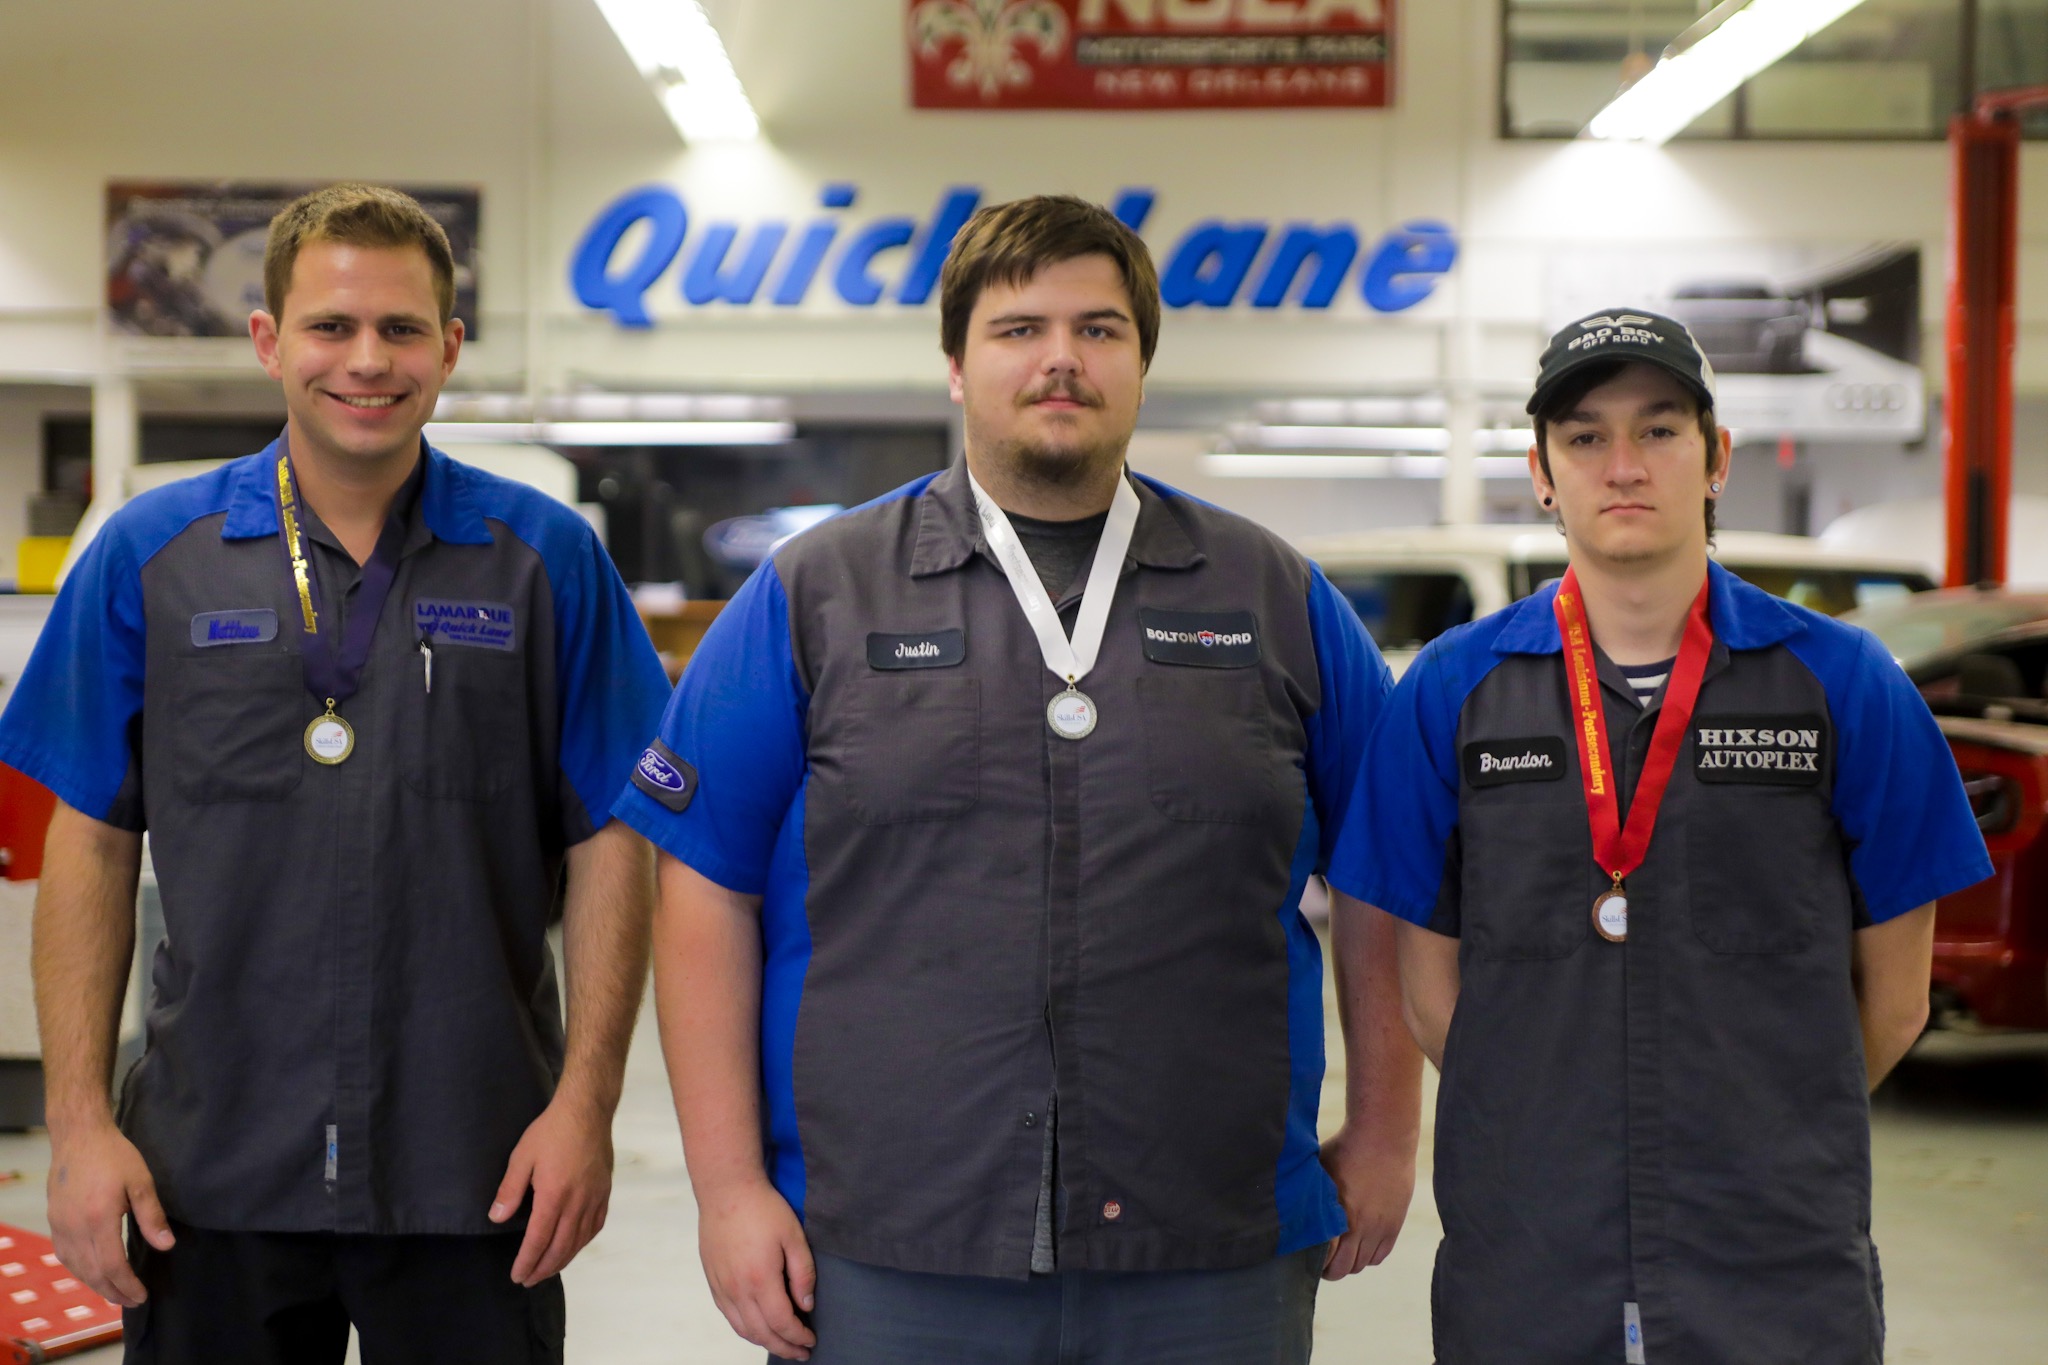 The three Louisiana SkillsUSA Automotive Service Technology competition medalists from Delgado Community College, from left: Matthew Lugo (gold medalist), Juston Fruge (silver medalist), Brandon Lefebvre (bronze medalist). All three are Ford ASSET students in the Delgado Motor Vehicle Technology program.